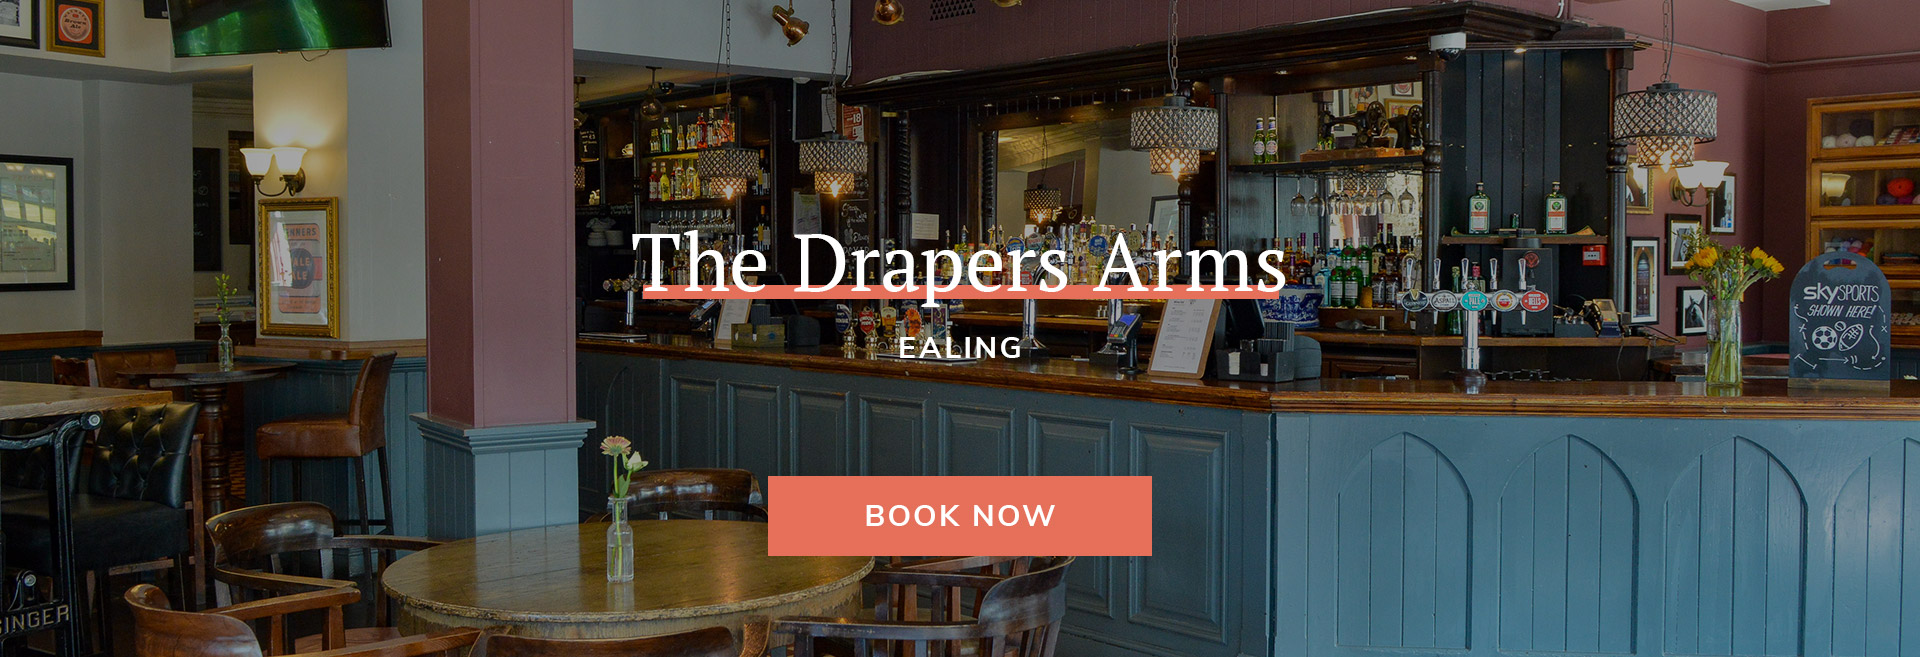 The Drapers Arms Banner 2